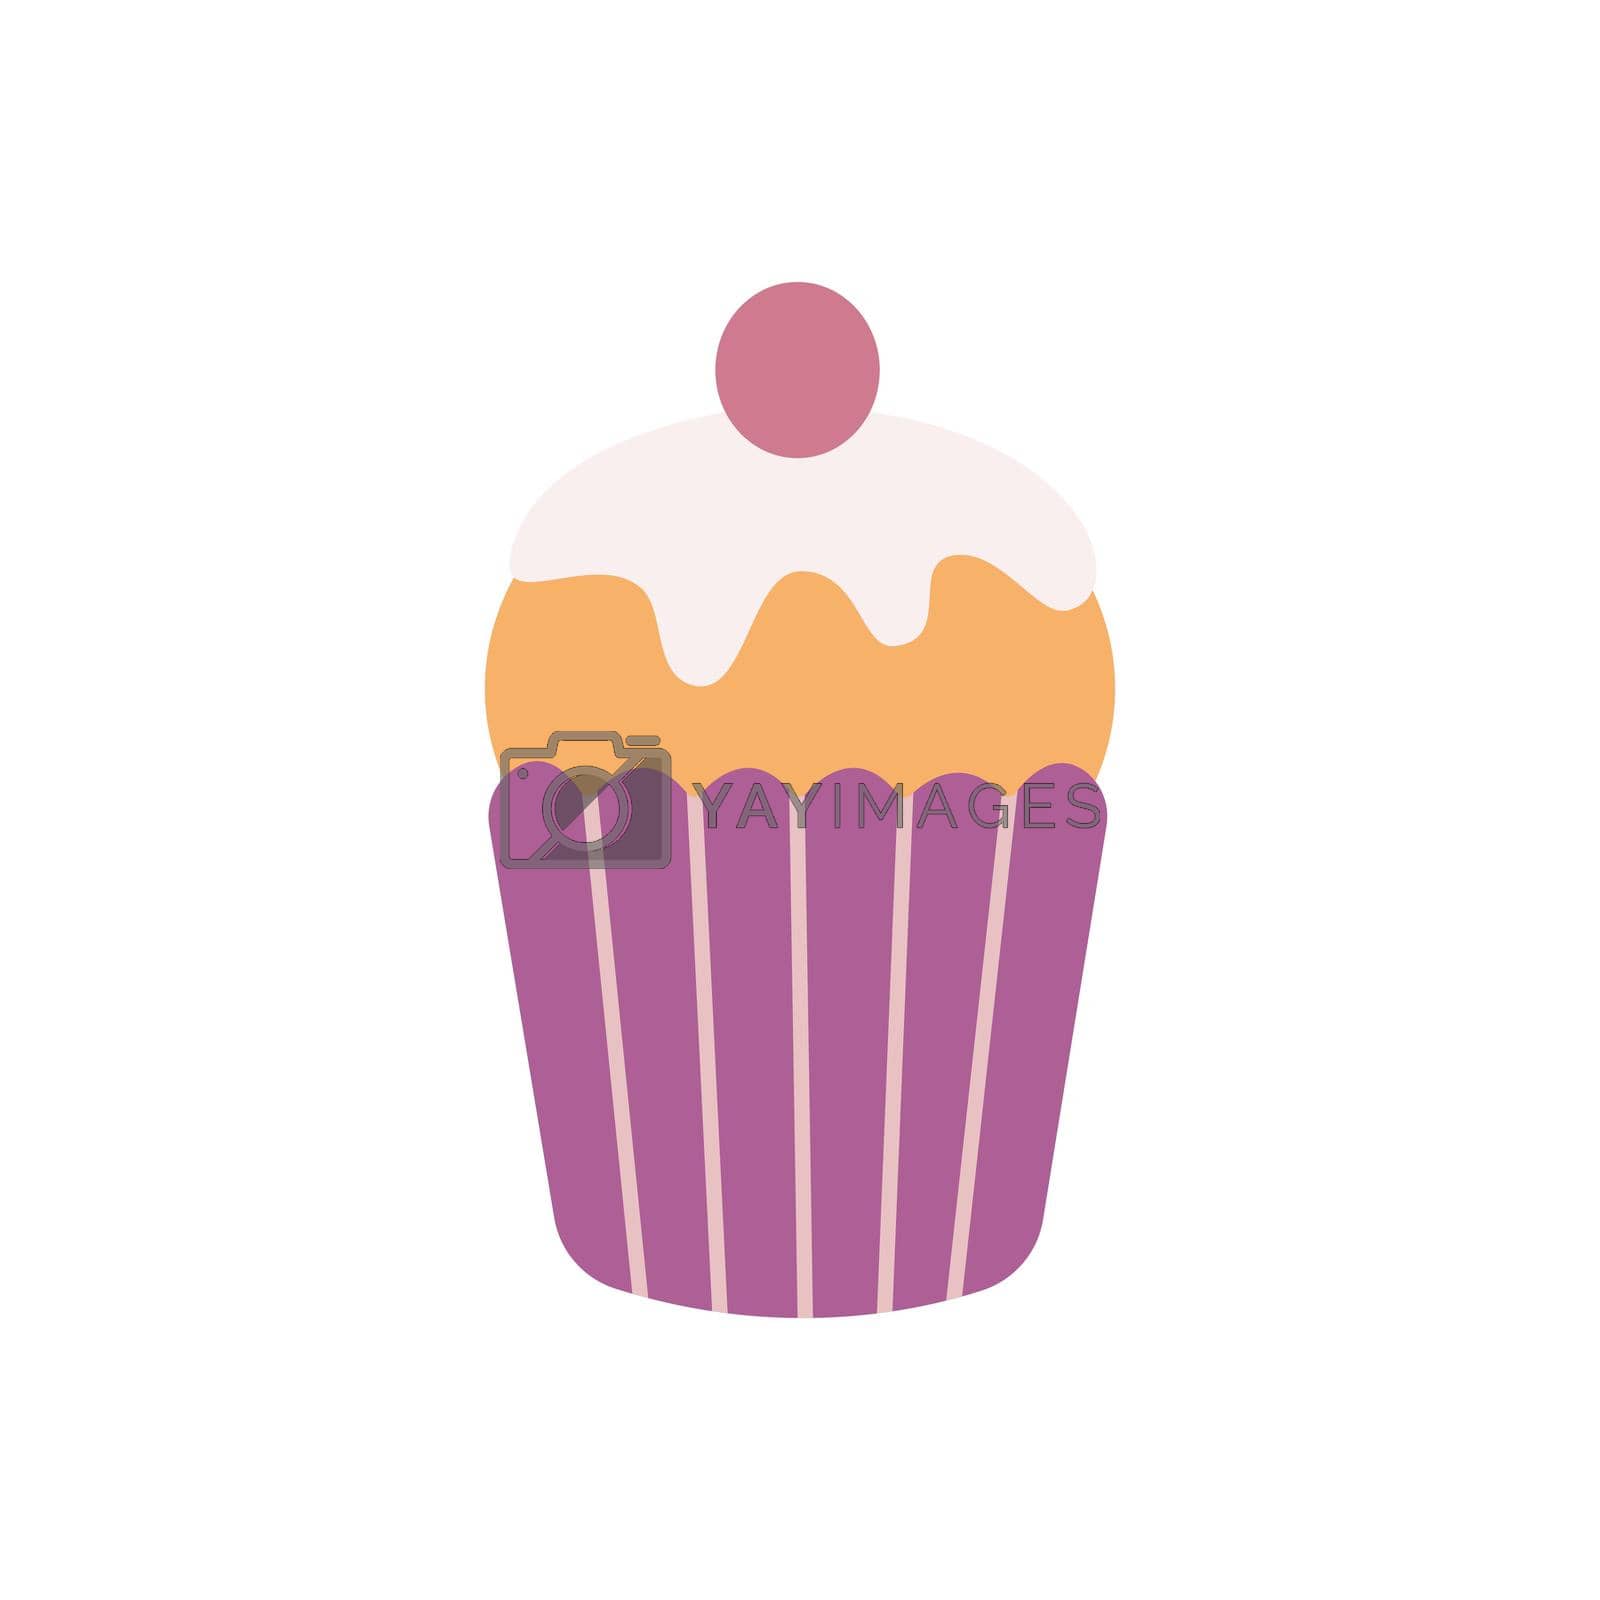 Royalty free image of Cupcake with cherry, sweet muffin, vector flat illustration by vetriciya_art